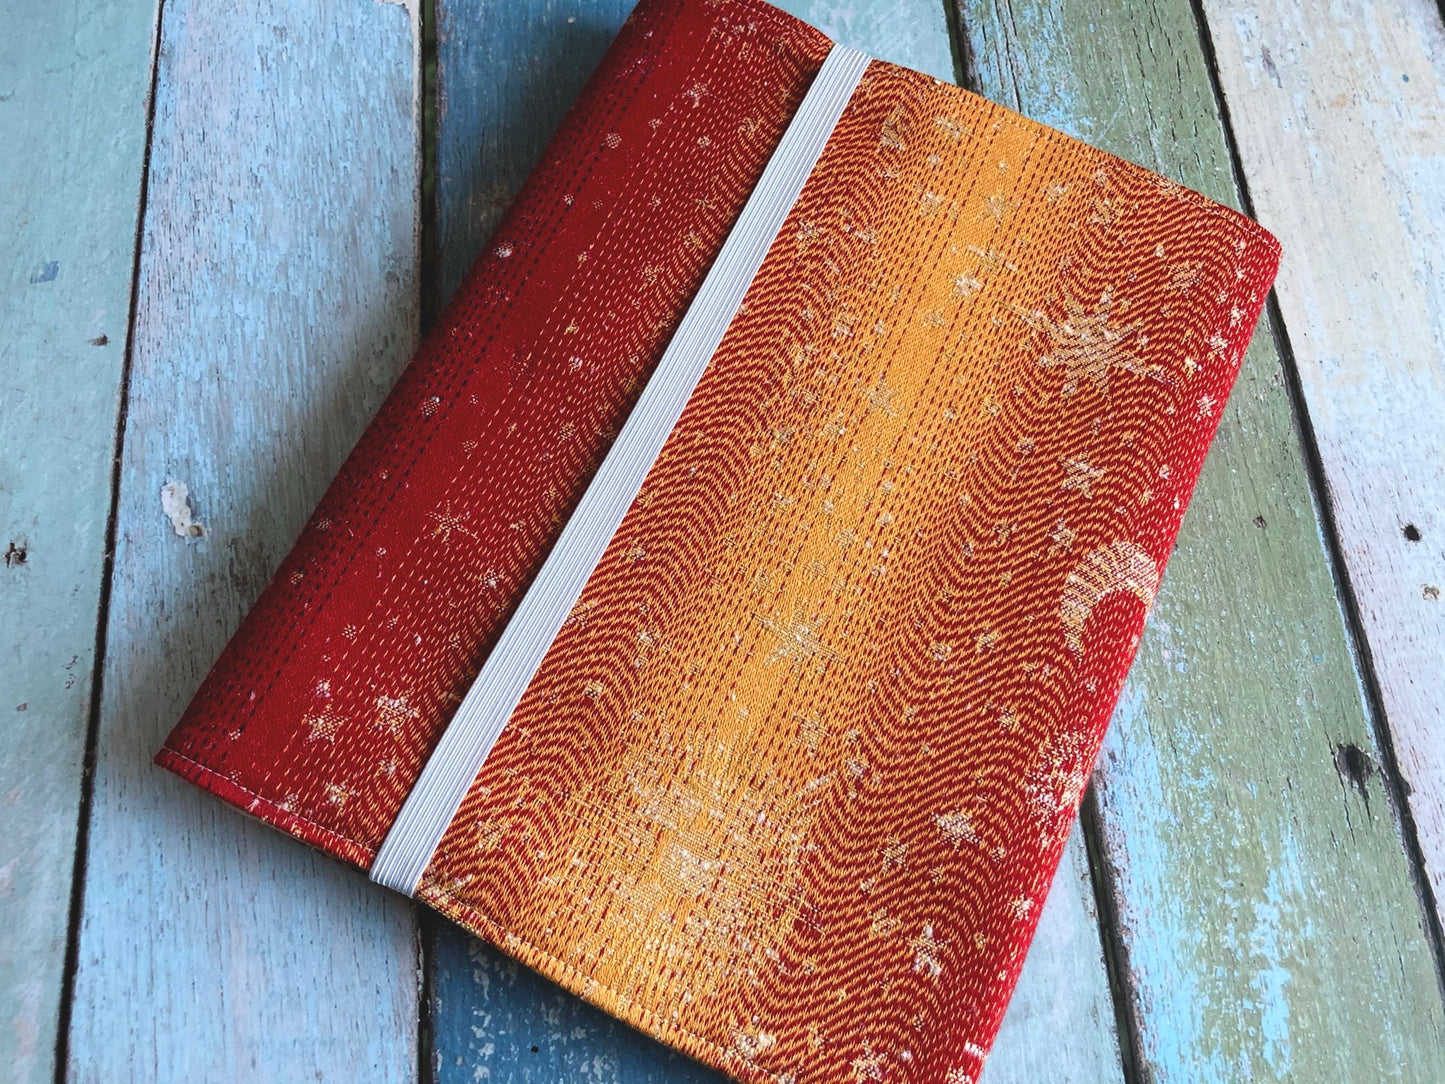 Surveyors Wanted Mars Journal and Notebook Cover